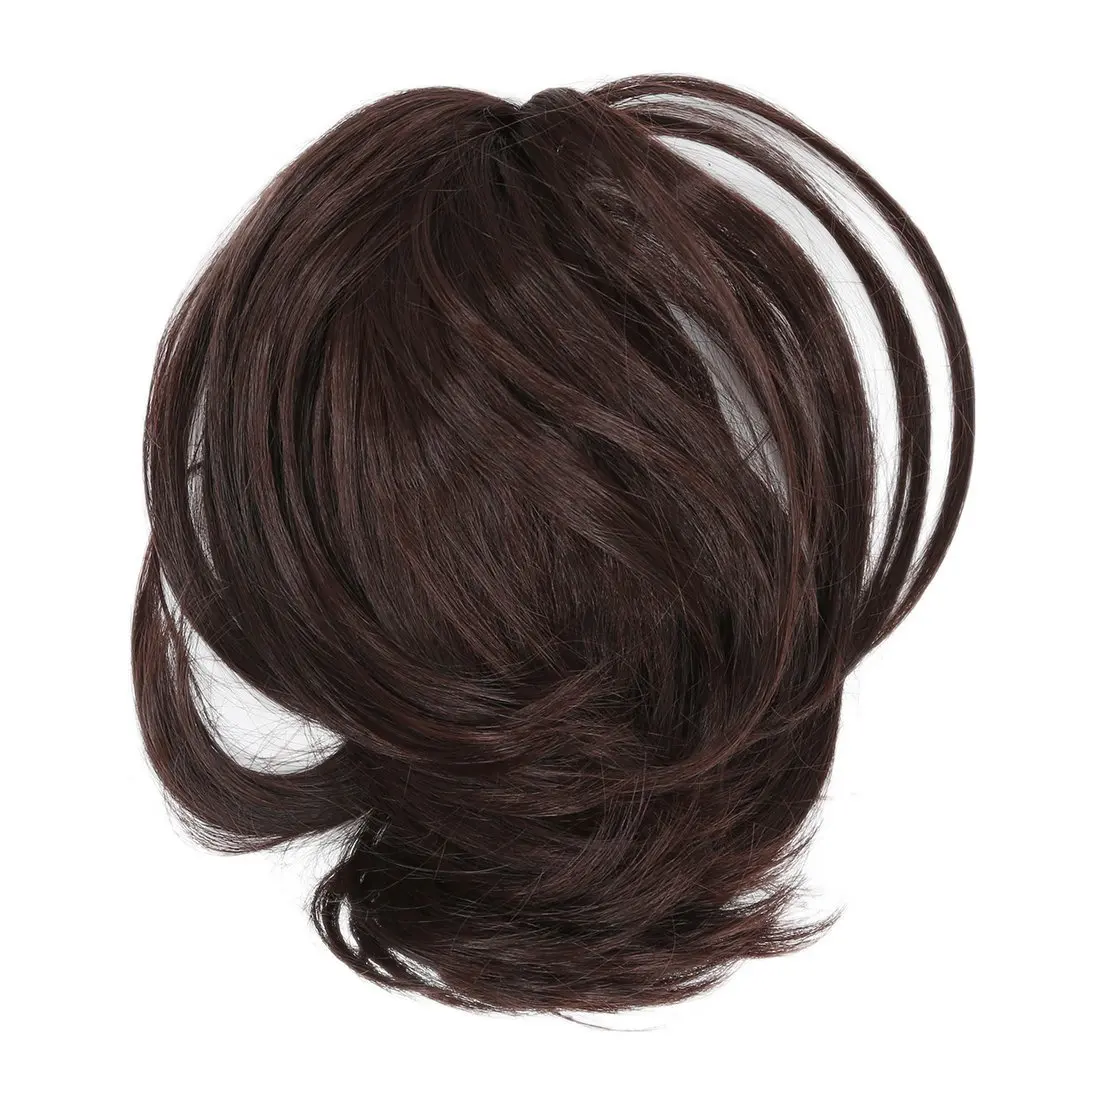 Cheap Ponytail Extensions For Short Hair Find Ponytail Extensions For Short Hair Deals On Line At Alibaba Com